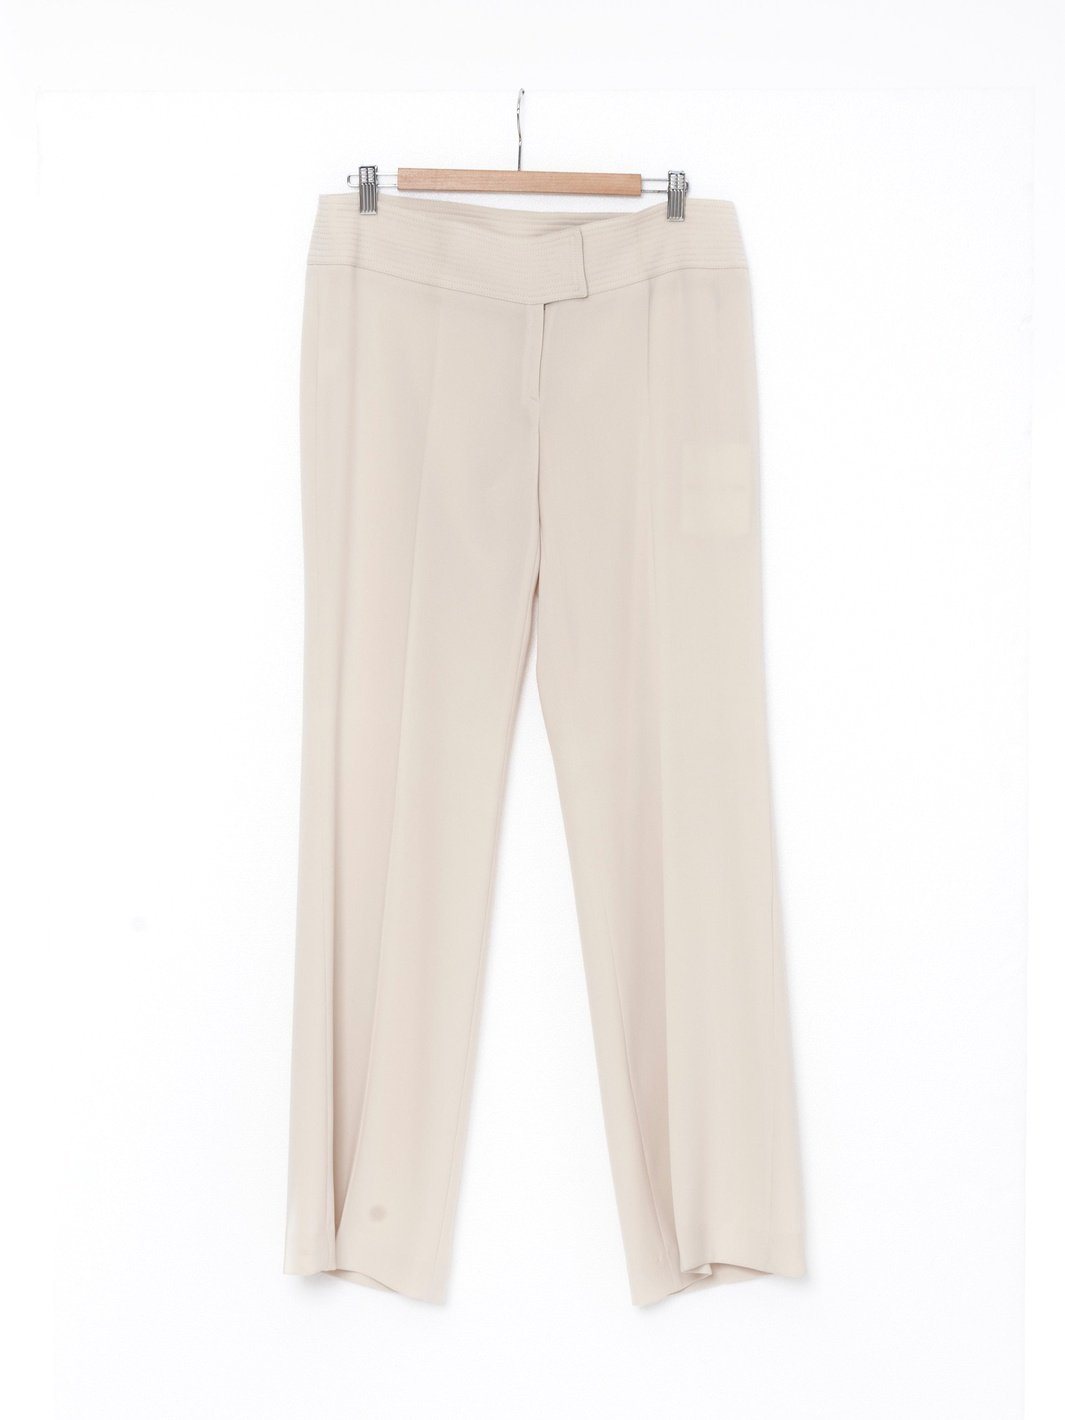 Y2K Ter et Bantine ivory-colored palazzo pants